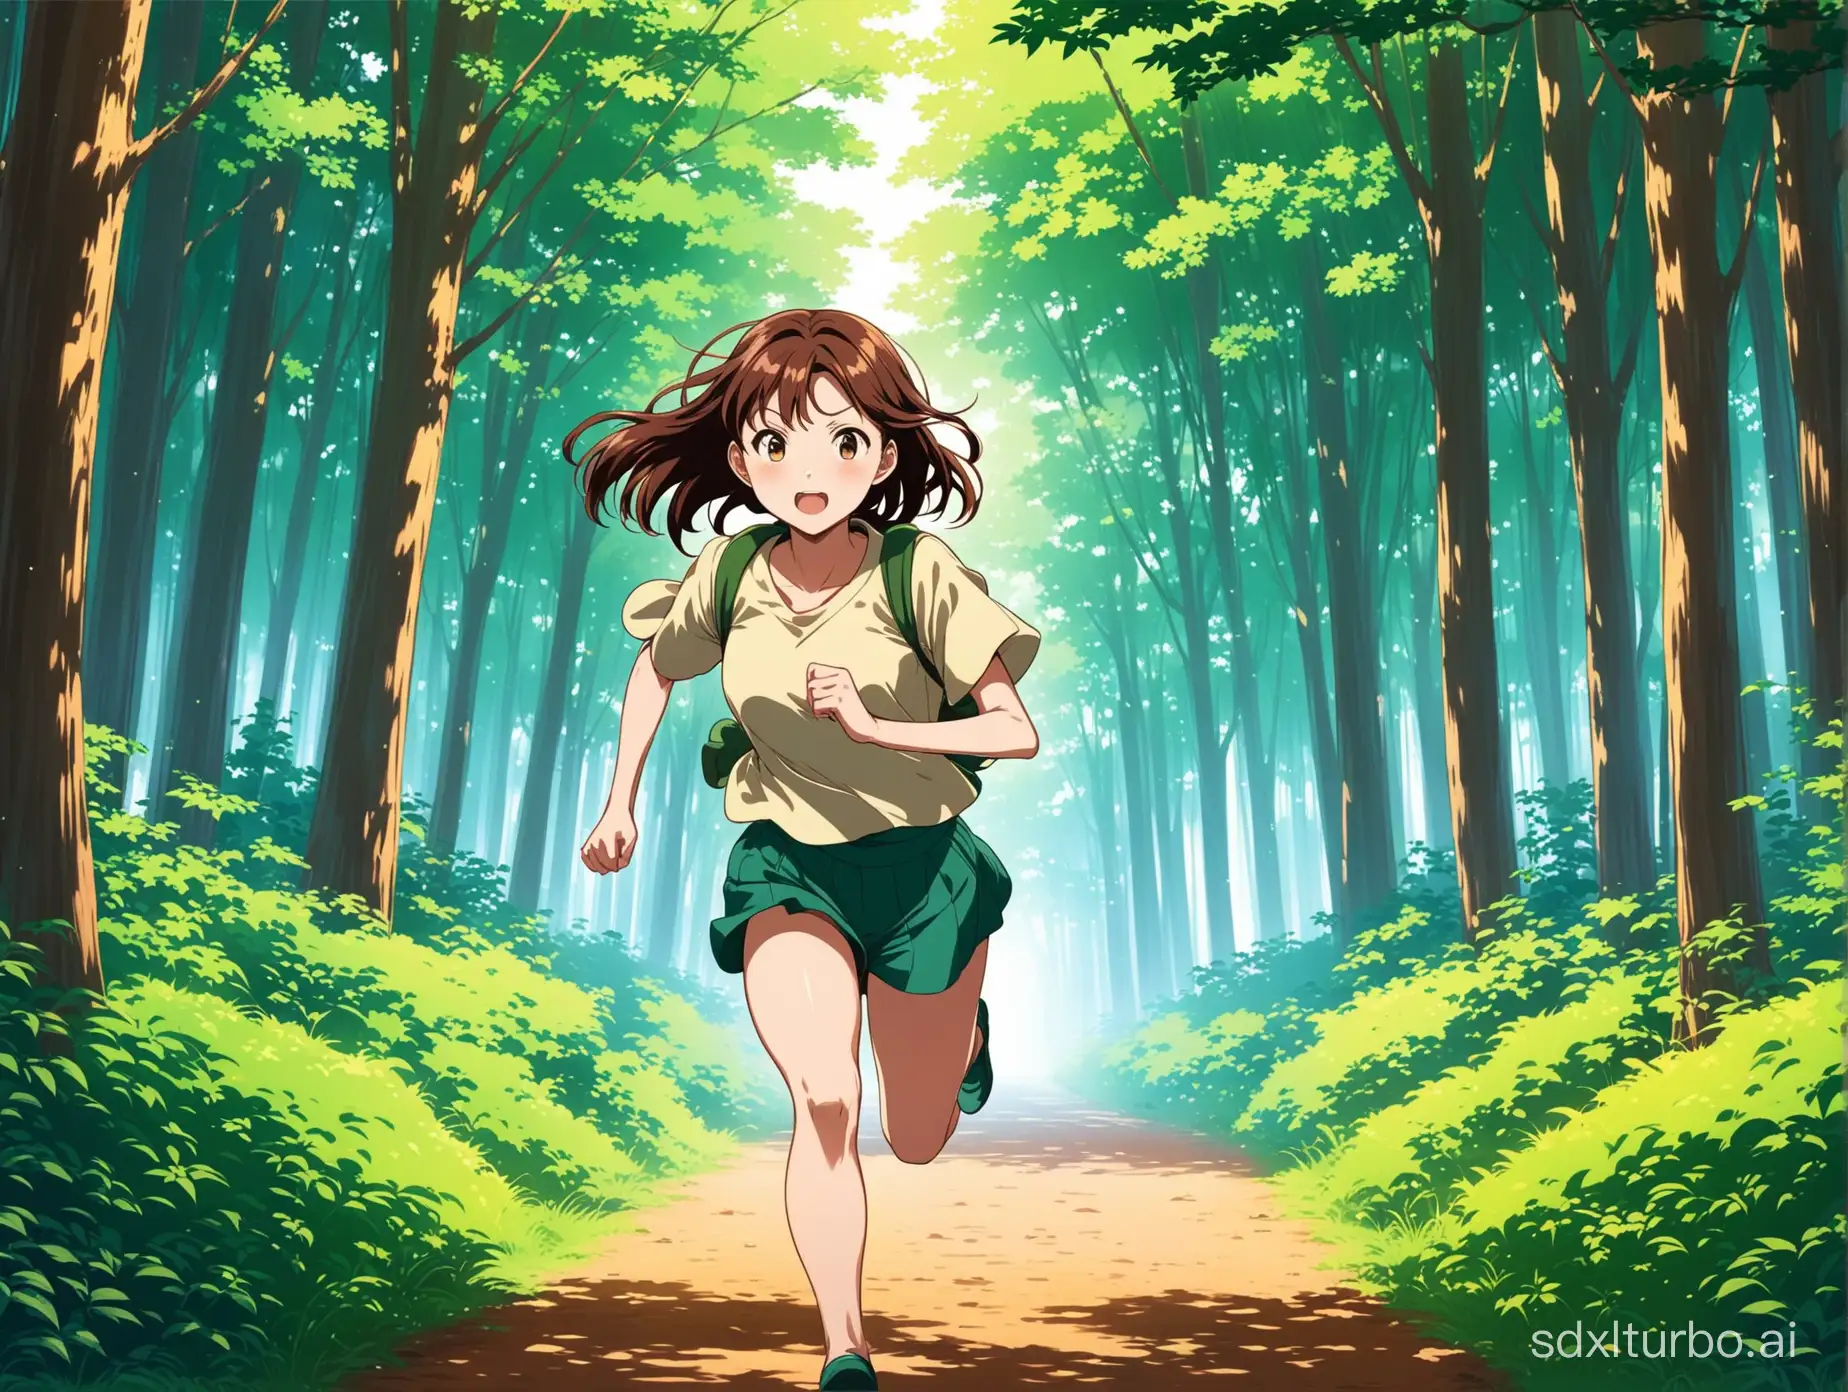 Anime-Style-Girl-Running-Through-Enchanted-Forest